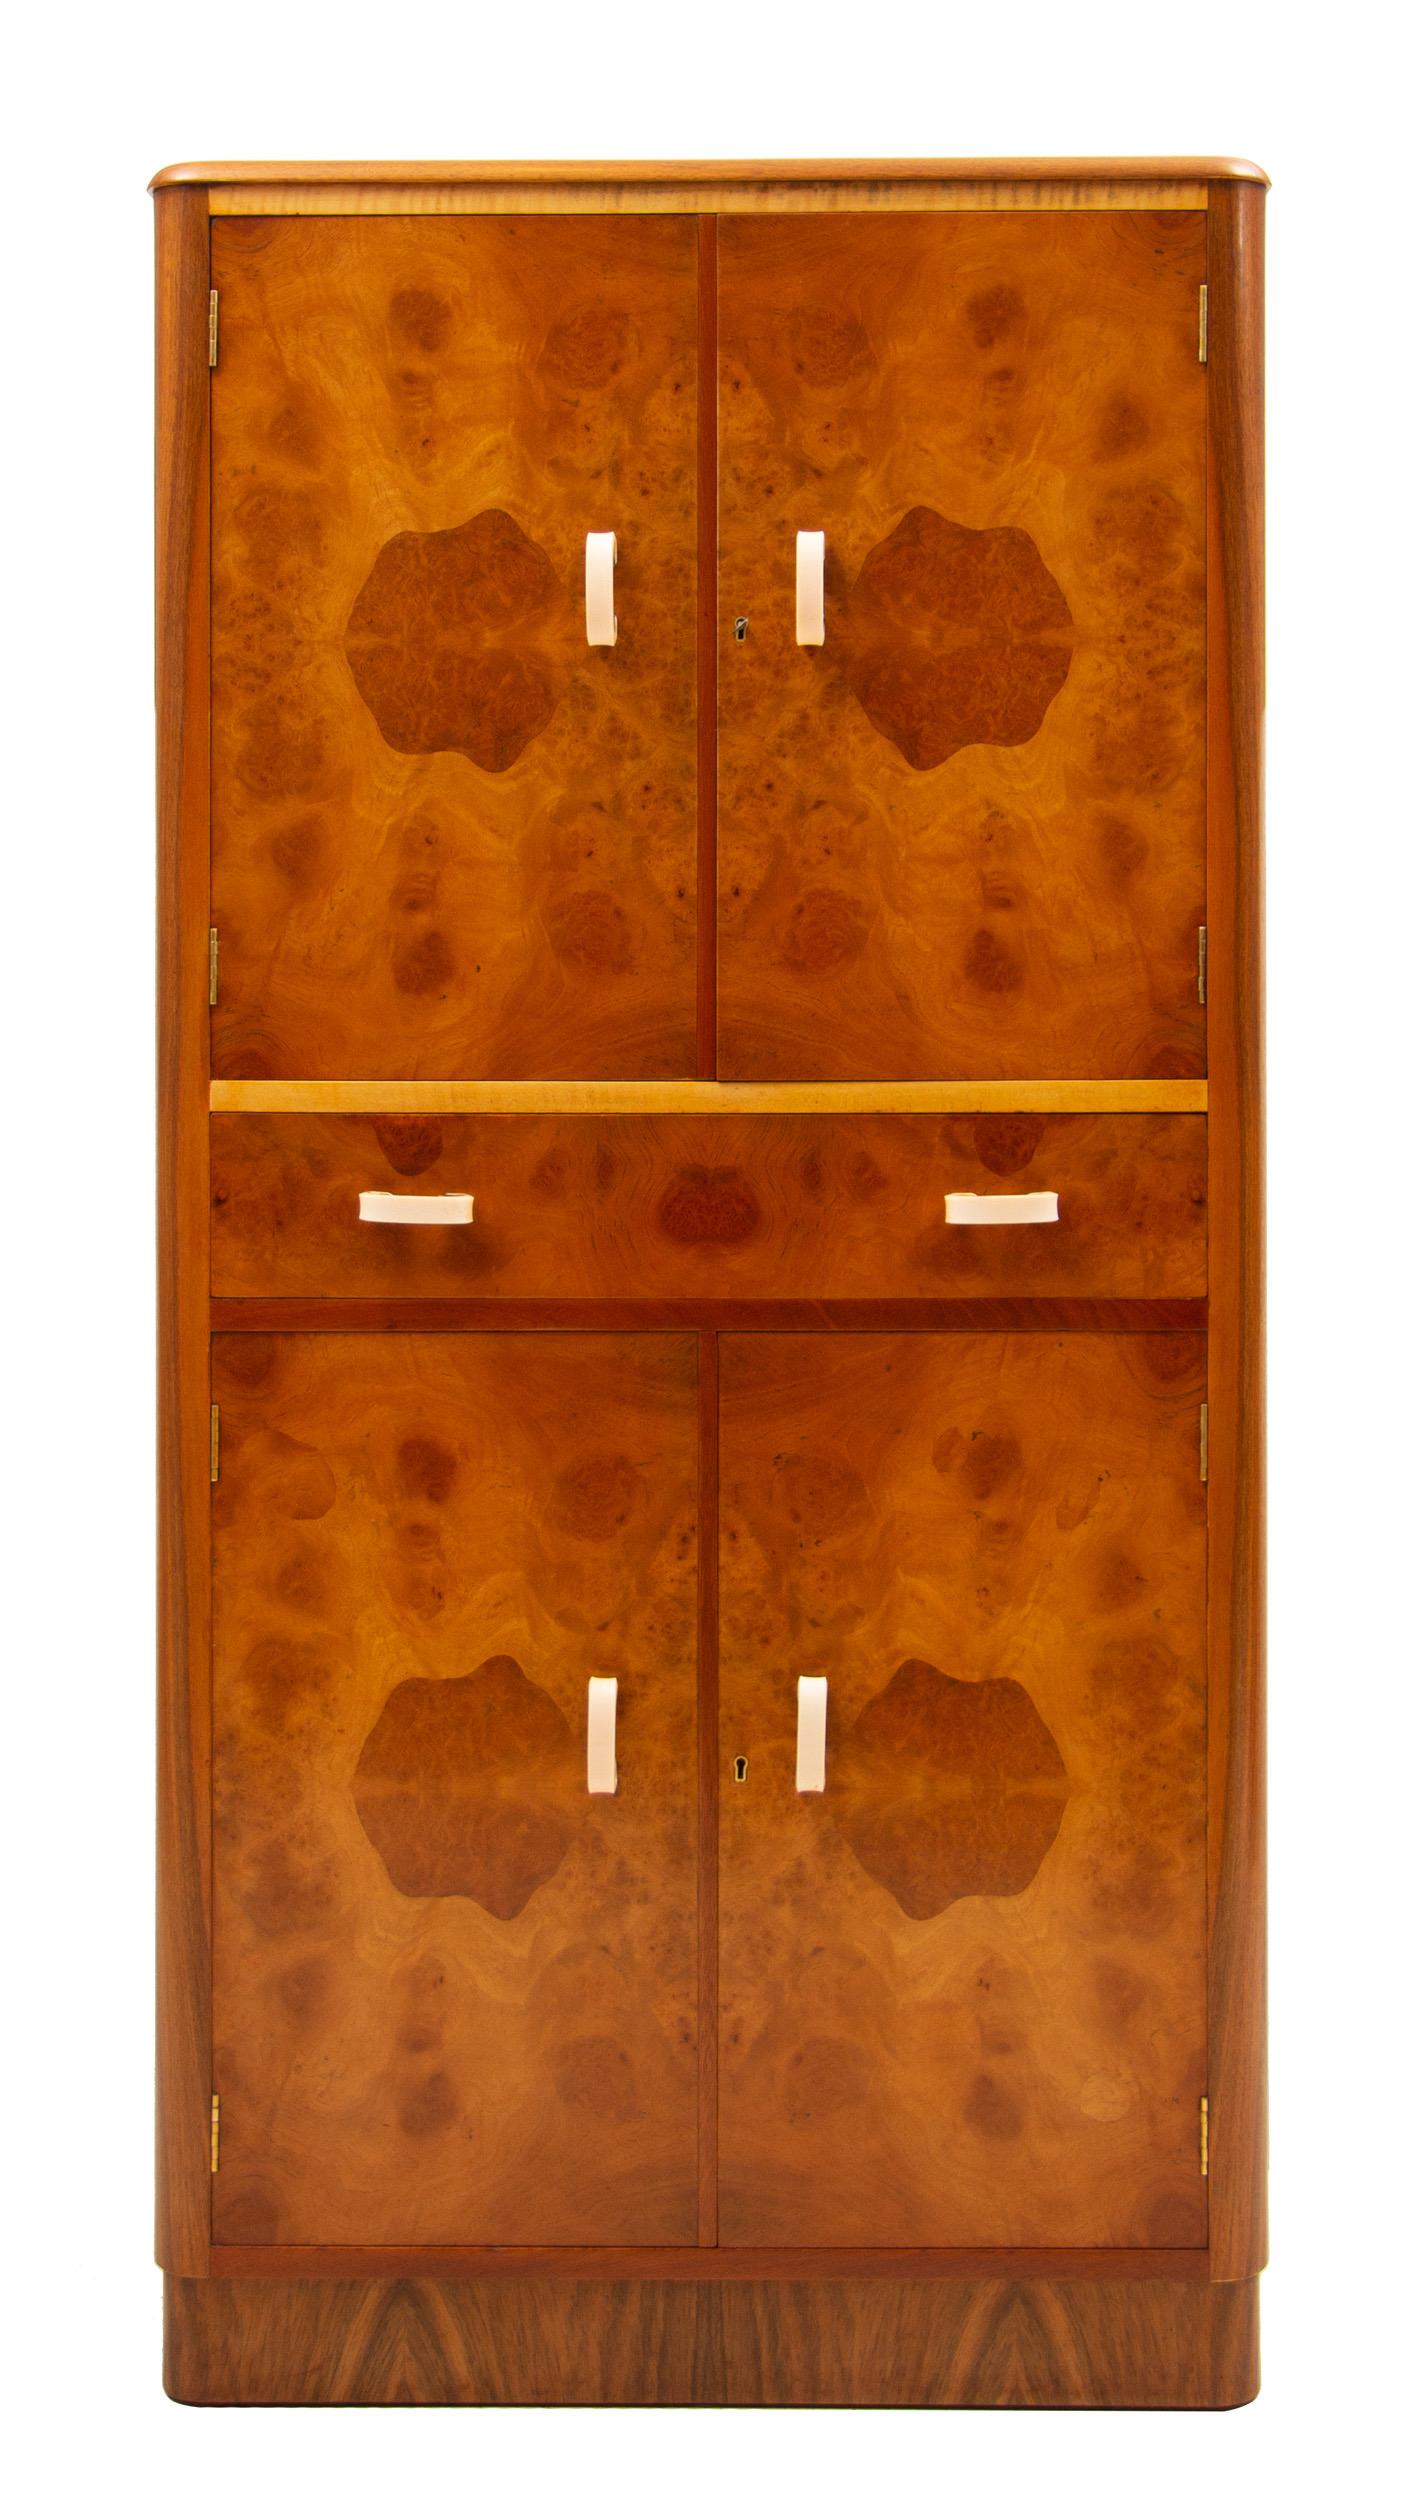 Art Deco cocktail cabinet in bird's-eye maple and walnut.
Upper section with internal glass shelves and mirrored back
Mirrored slide for cutting lemons and limes
Single drawer above lower cupboard with two doors
Measures: H 153 cm, W 77 cm, D 51